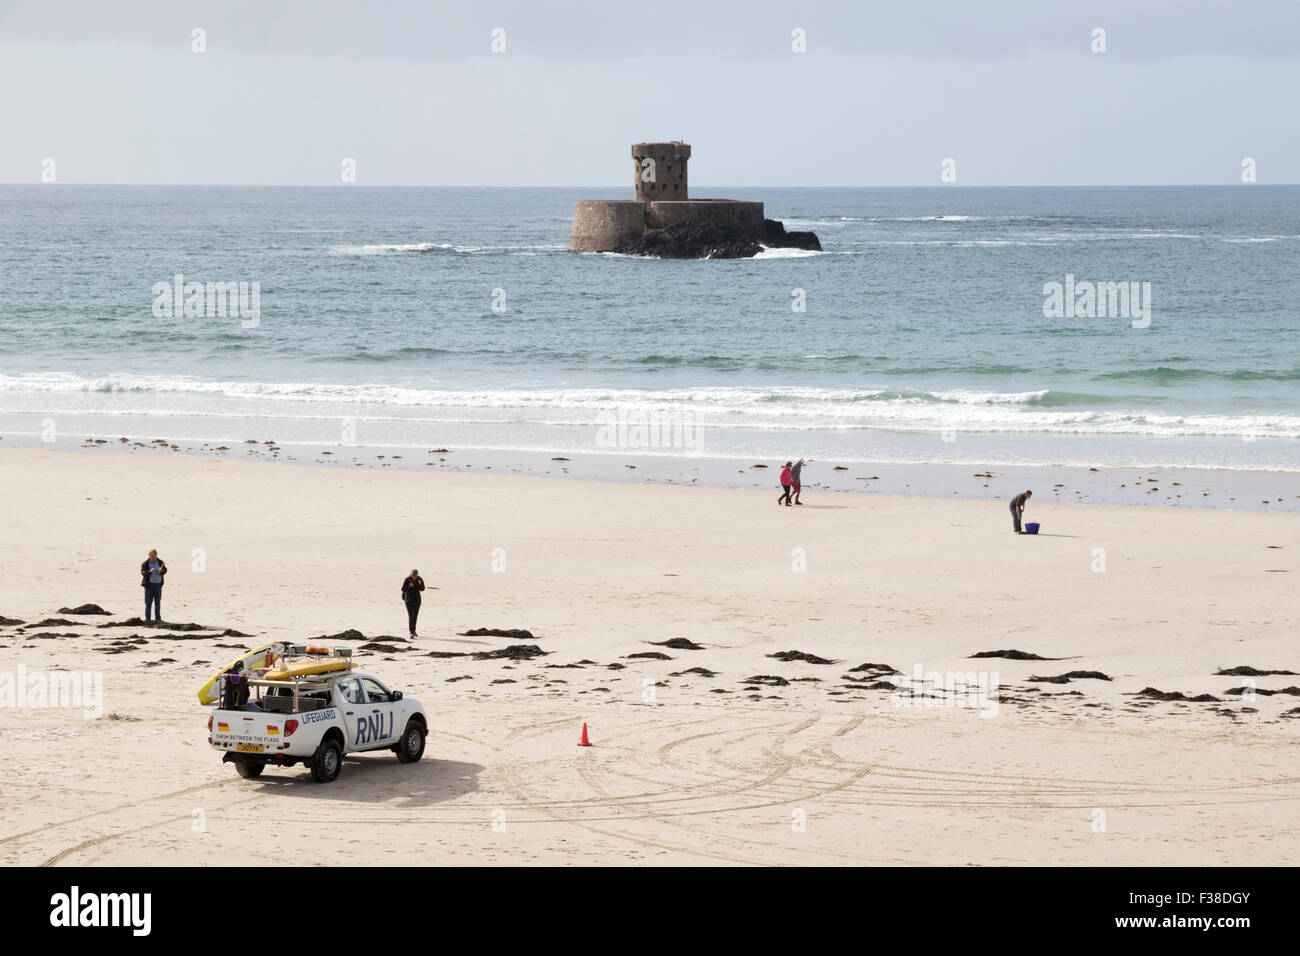 La Rocco Tower lying offshore in St Ouen's Bay on Jersey's west coast Stock Photo